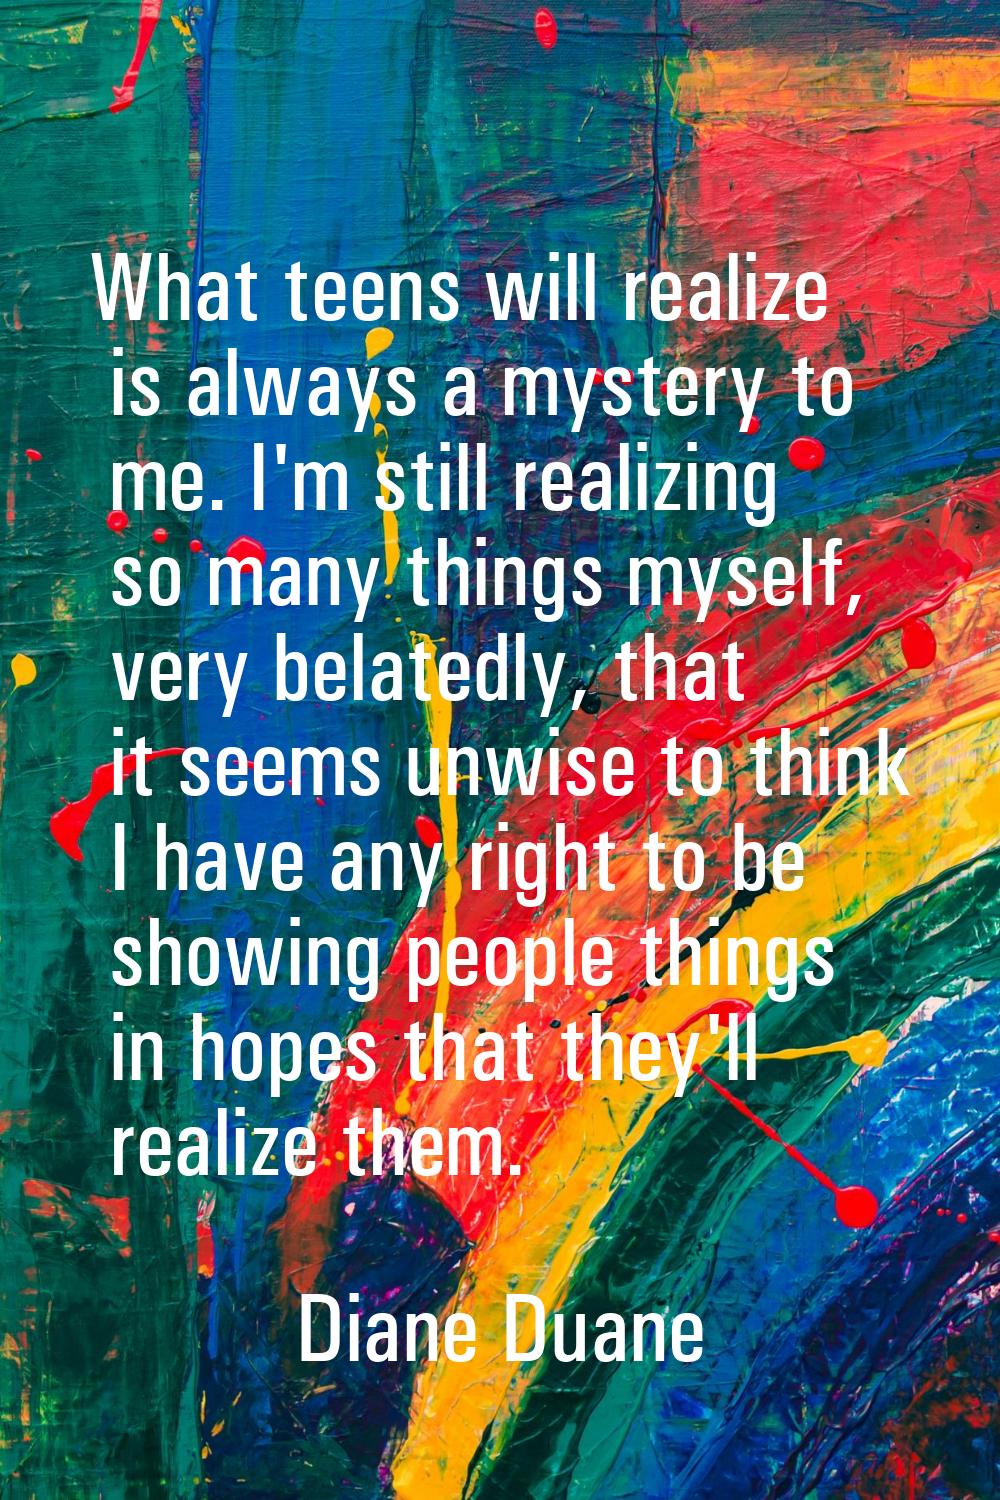 What teens will realize is always a mystery to me. I'm still realizing so many things myself, very 